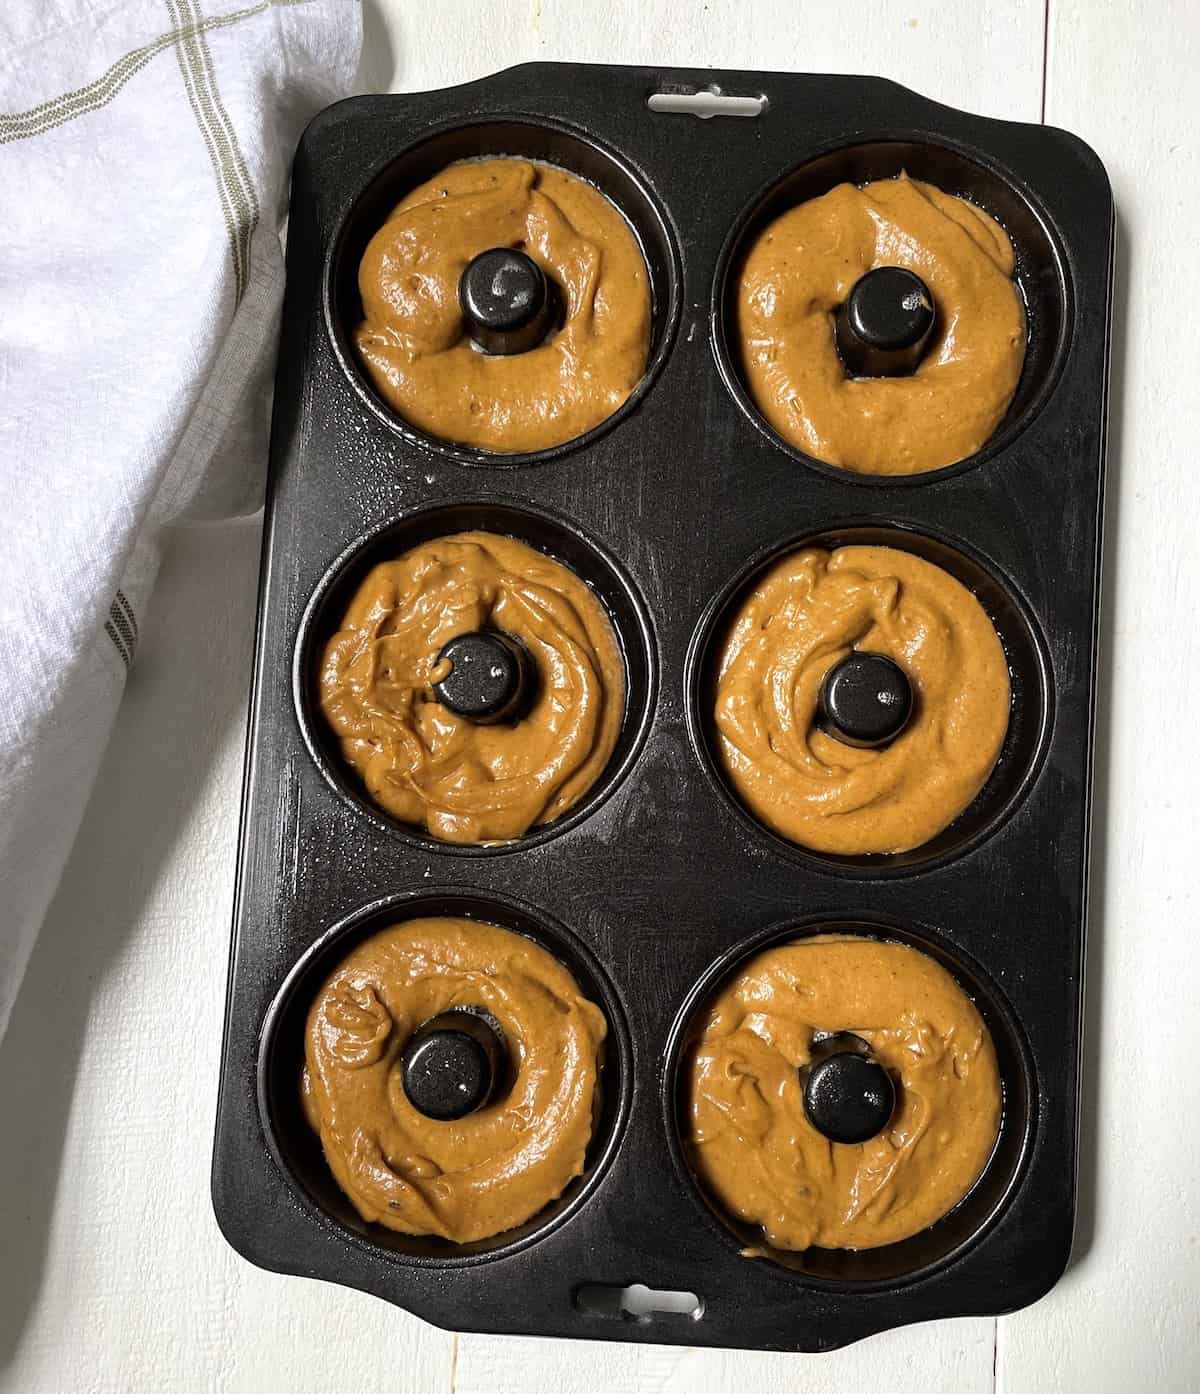 Donuts in a donut pan before baking.